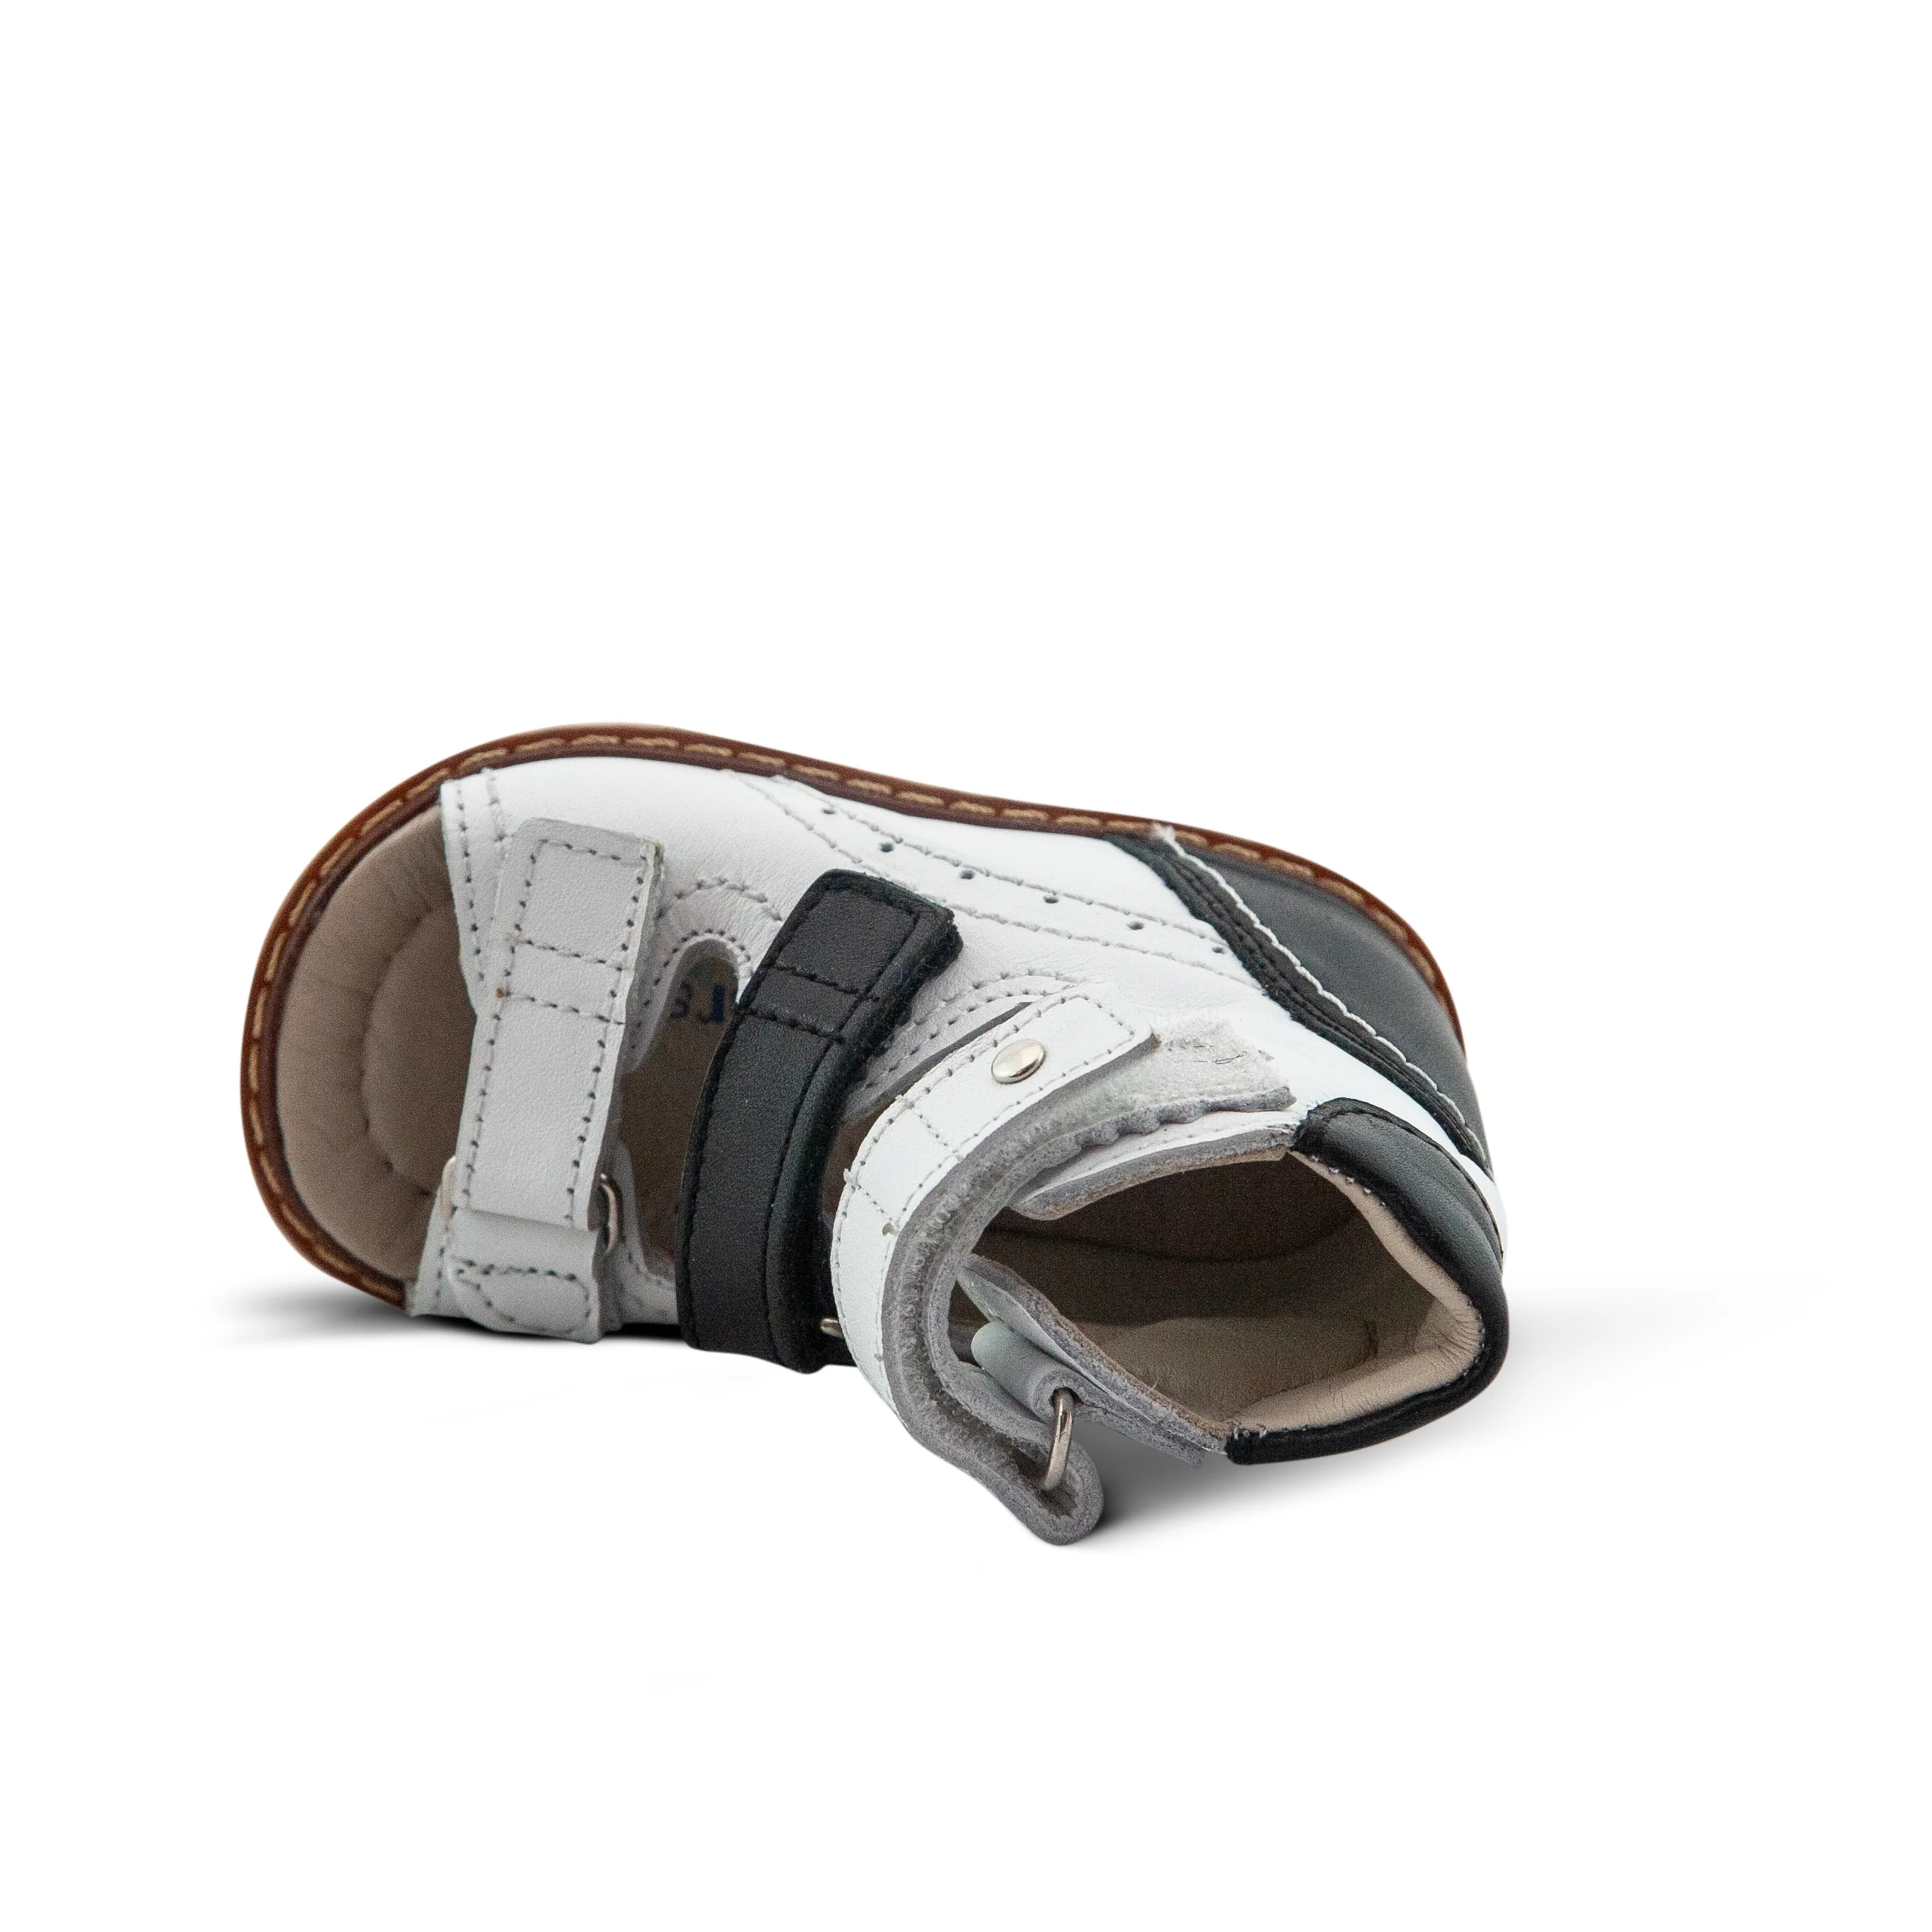 A white and black kids' sandal with two straps